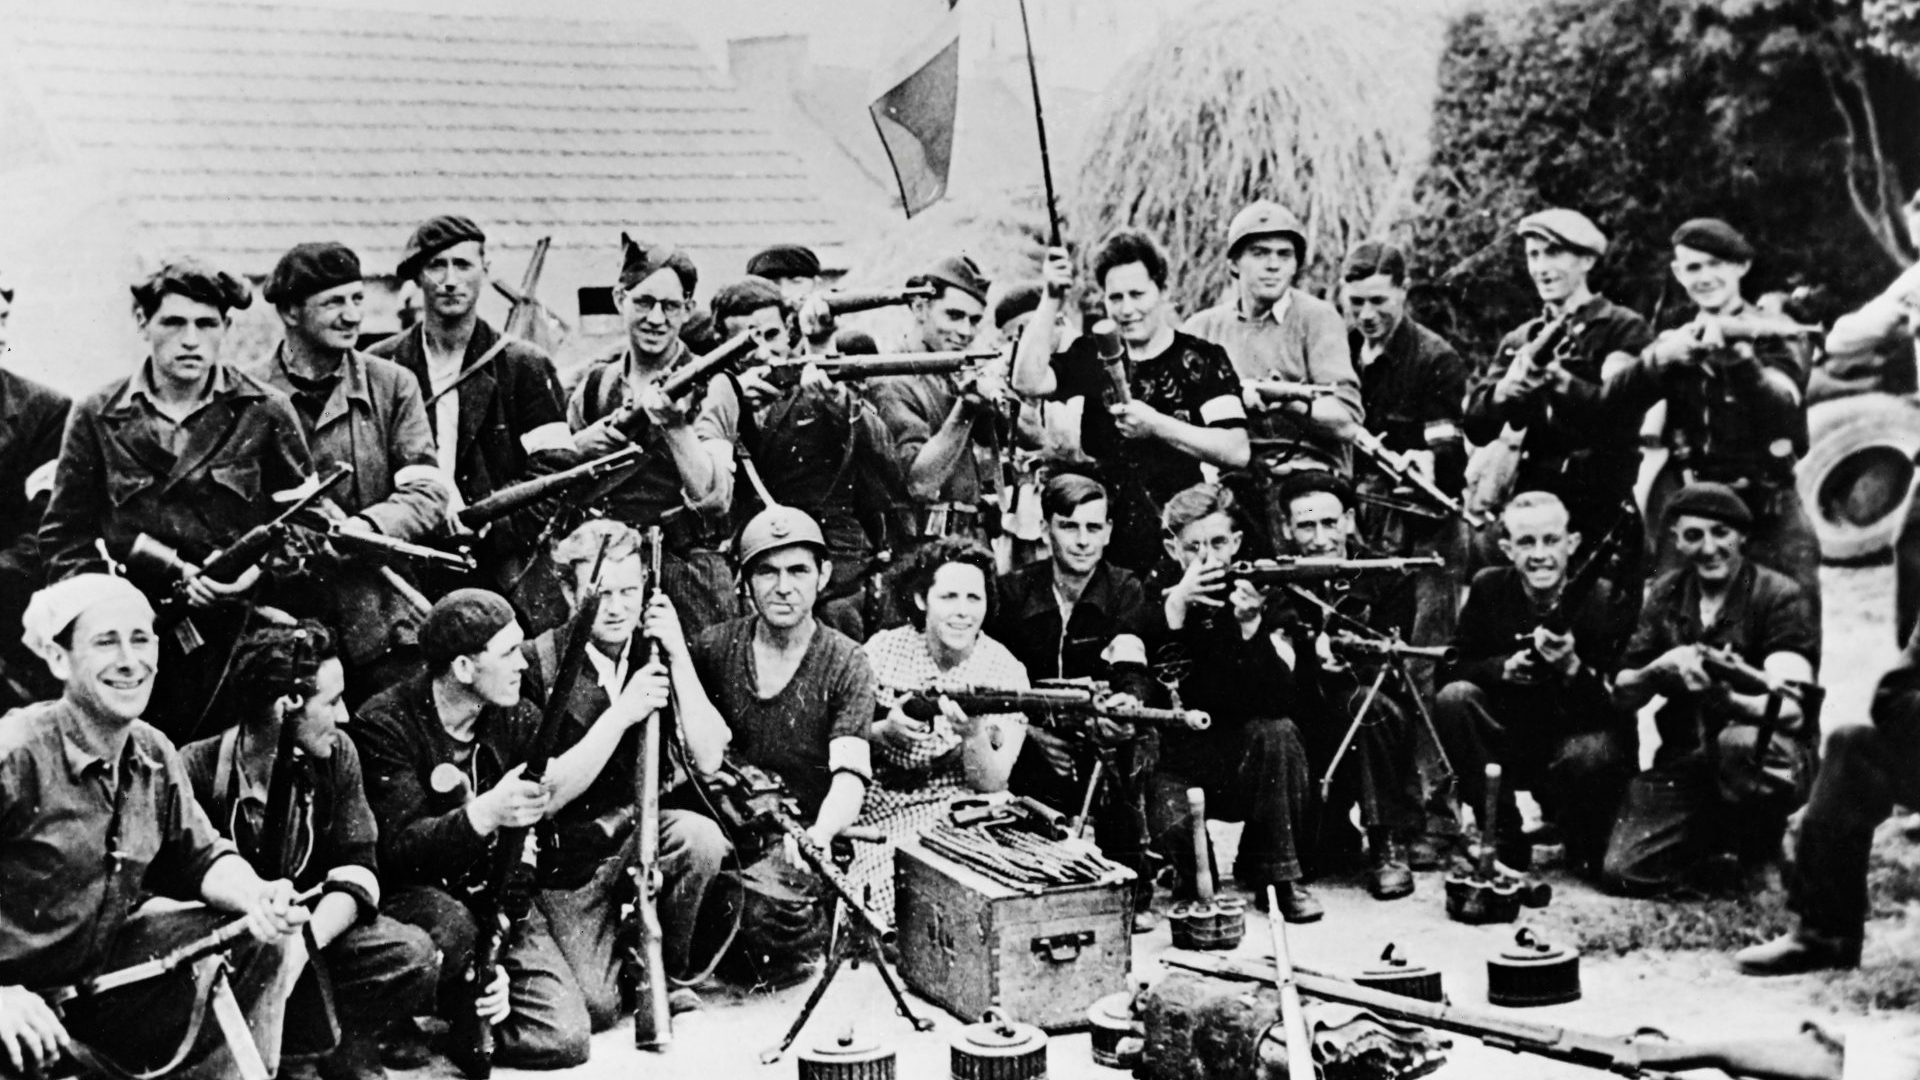 A group of French Resistance fighters 
in the courtyard of a farm, summer 1944. Photo: AFP/Getty Images